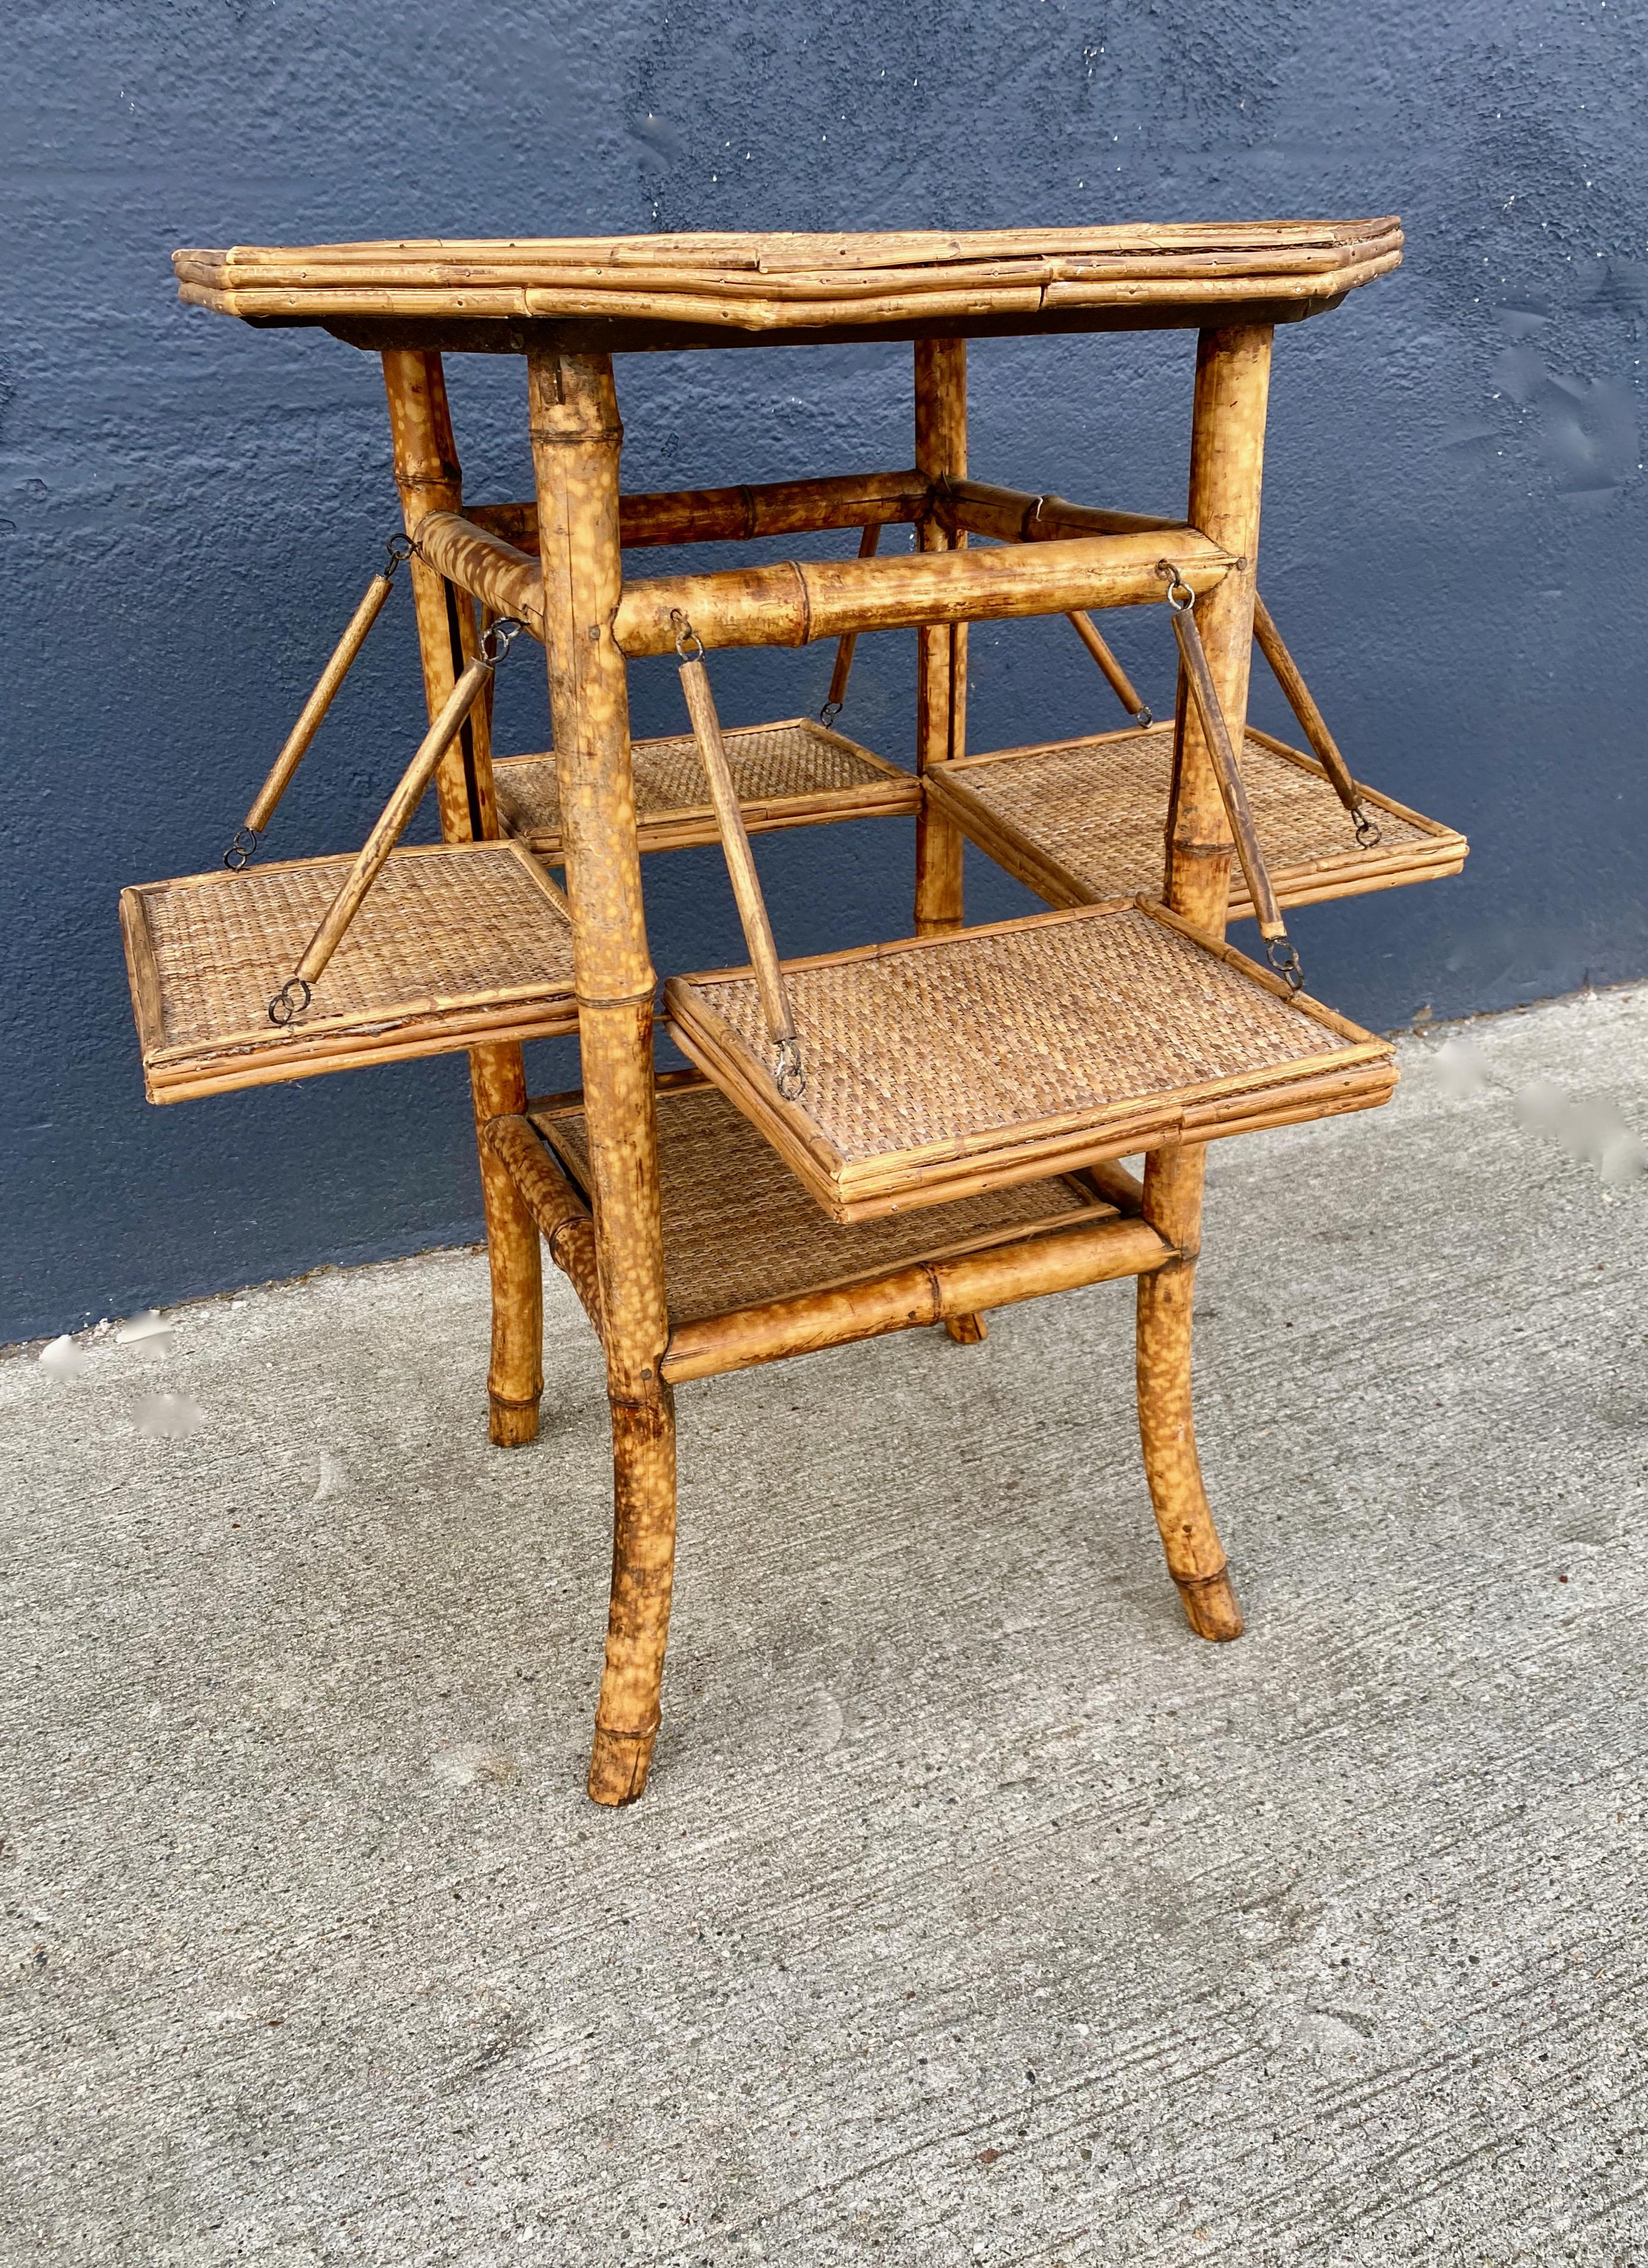 20th Century English Rattan and Bamboo Tea Table, C. 1900-1920 For Sale